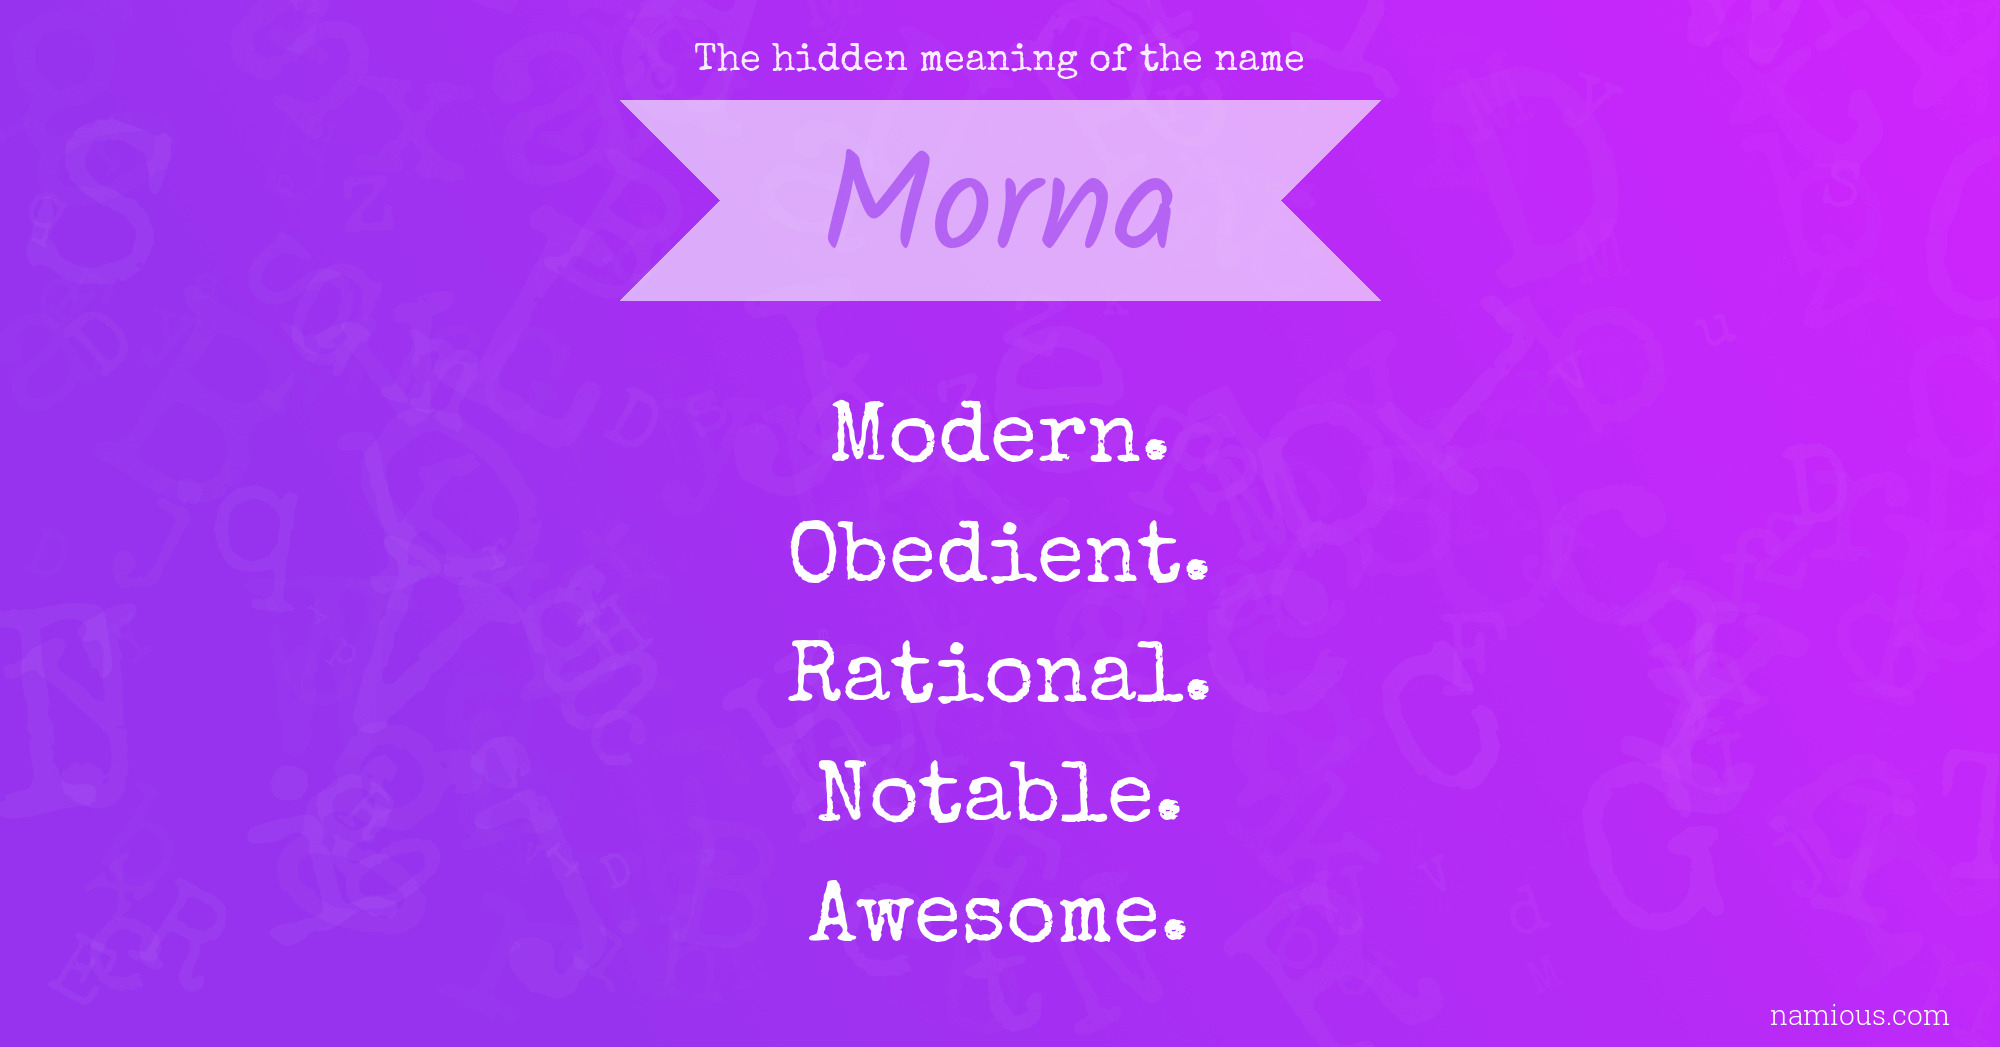 The hidden meaning of the name Morna